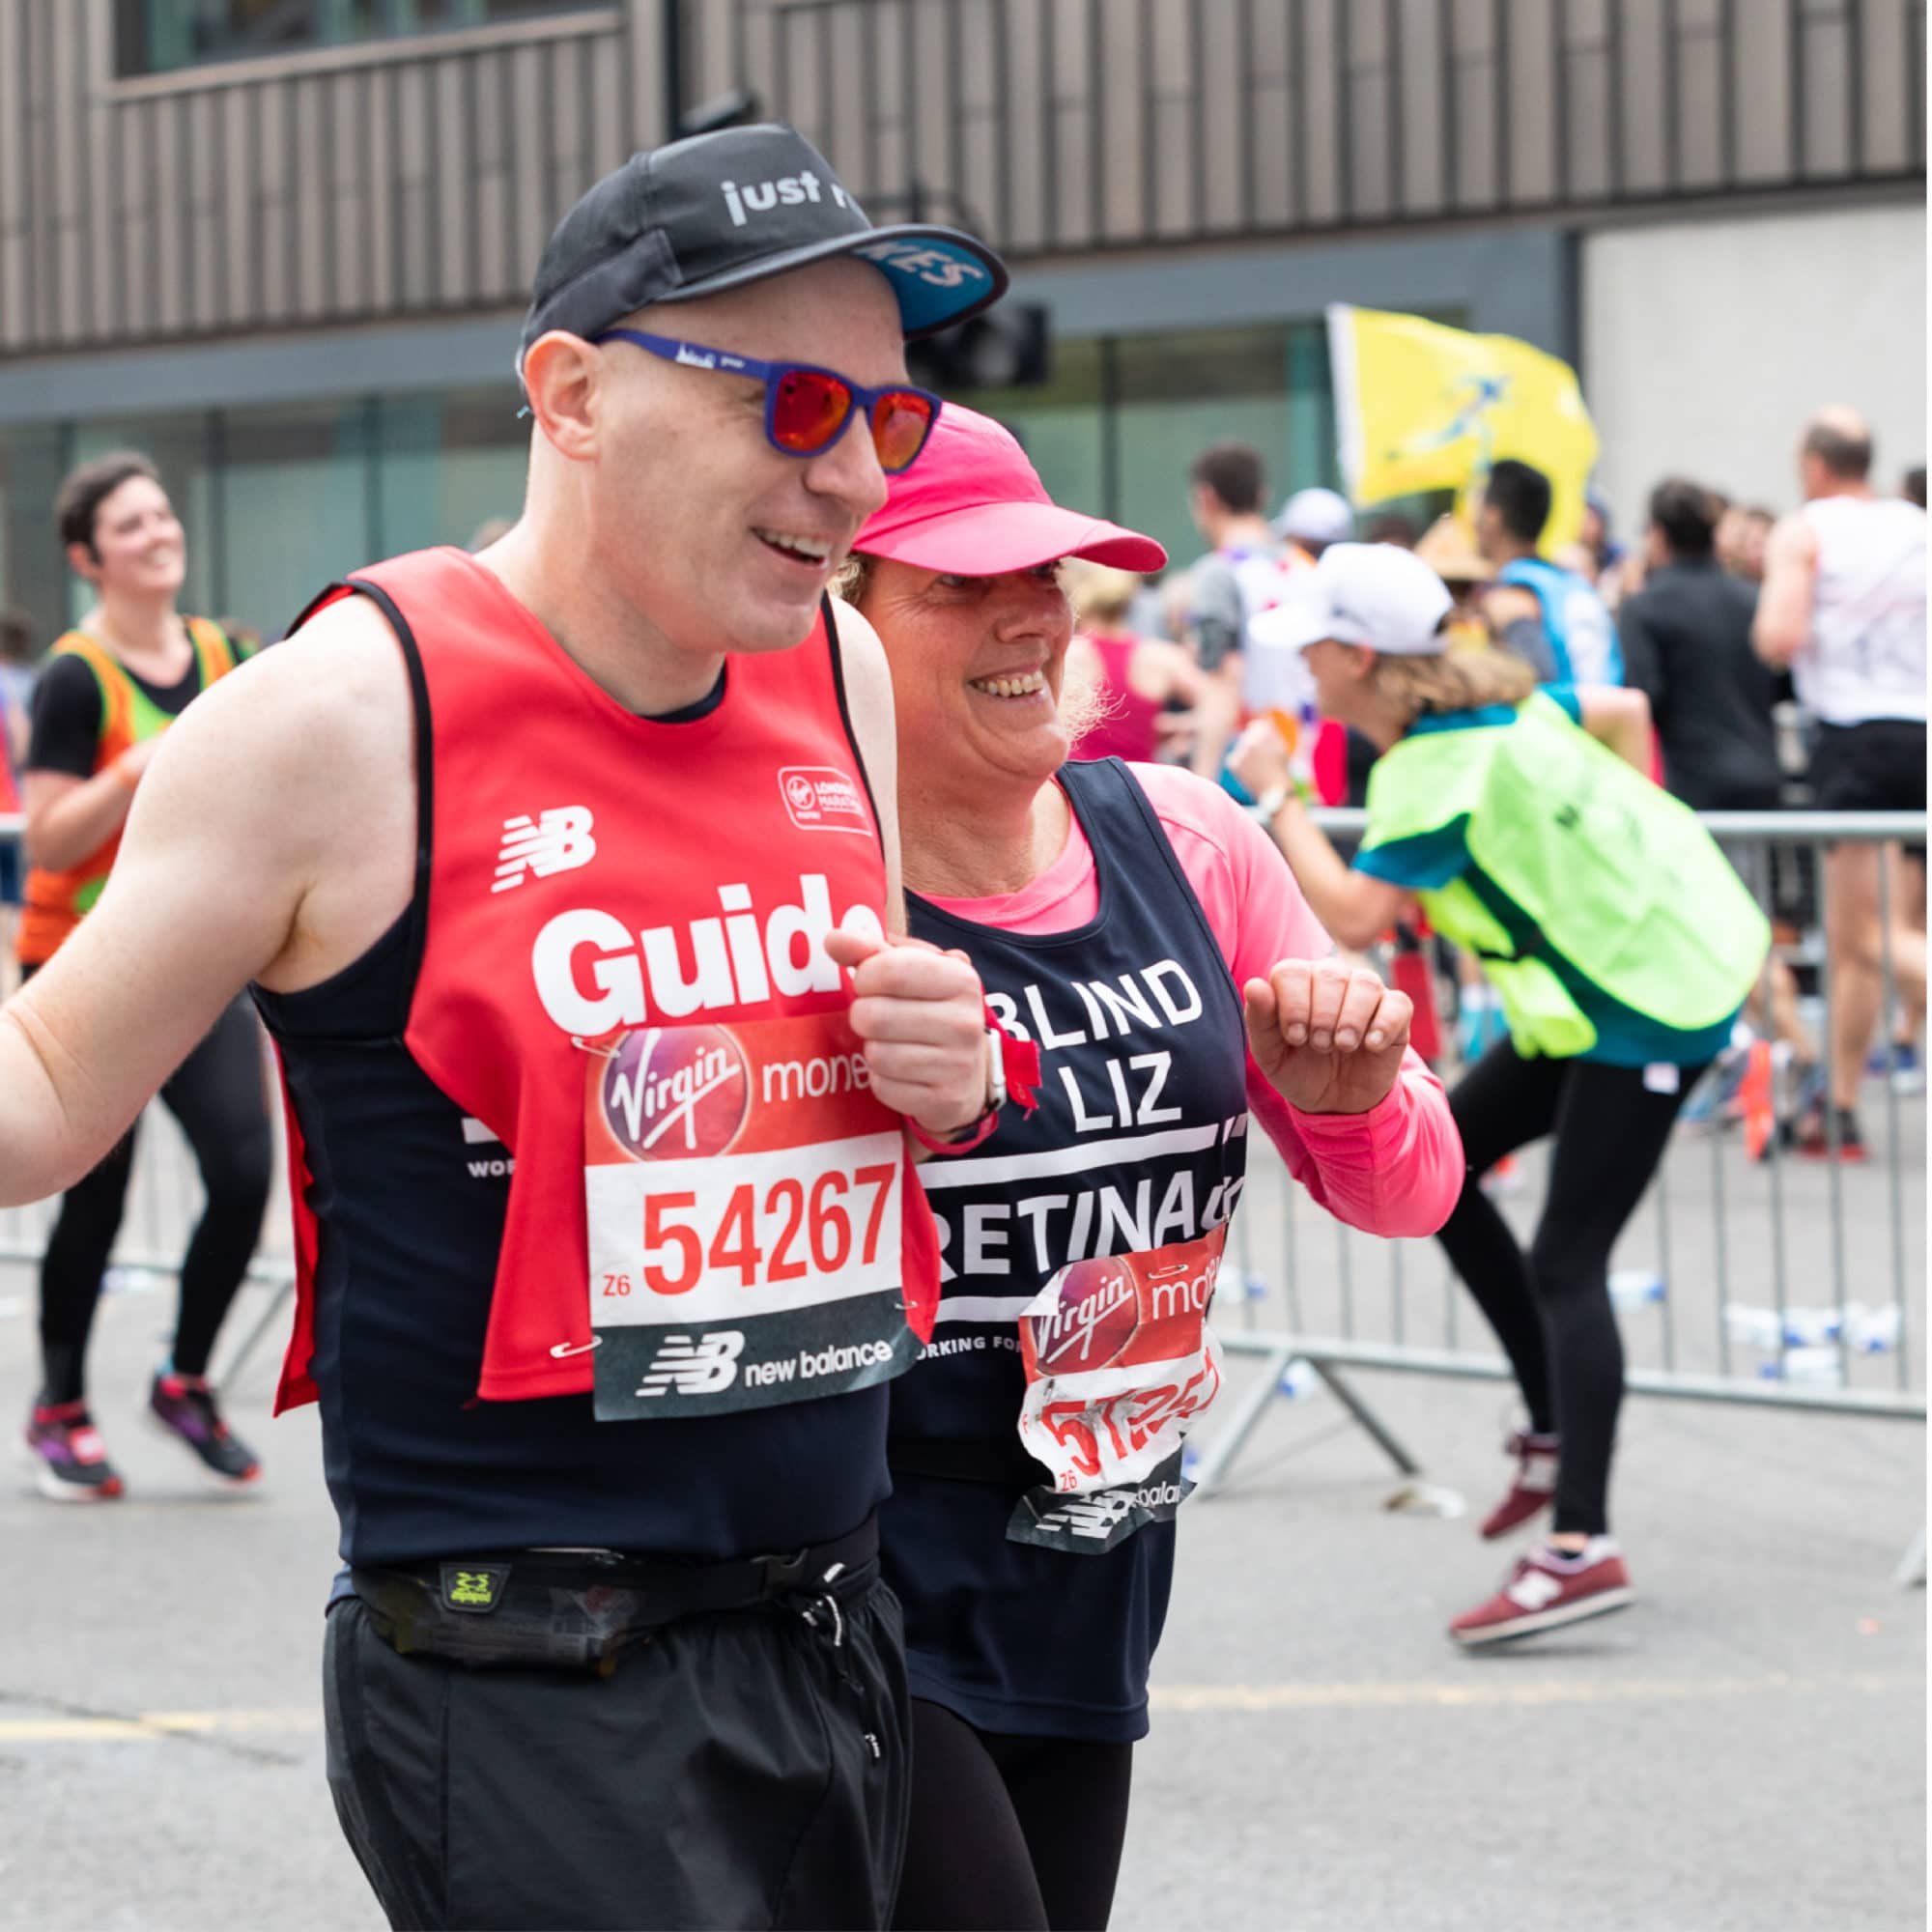 Image shows a runner in a red vest with 'guide' written on the front running alongside a Retina UK runner in a blue charity running vest.